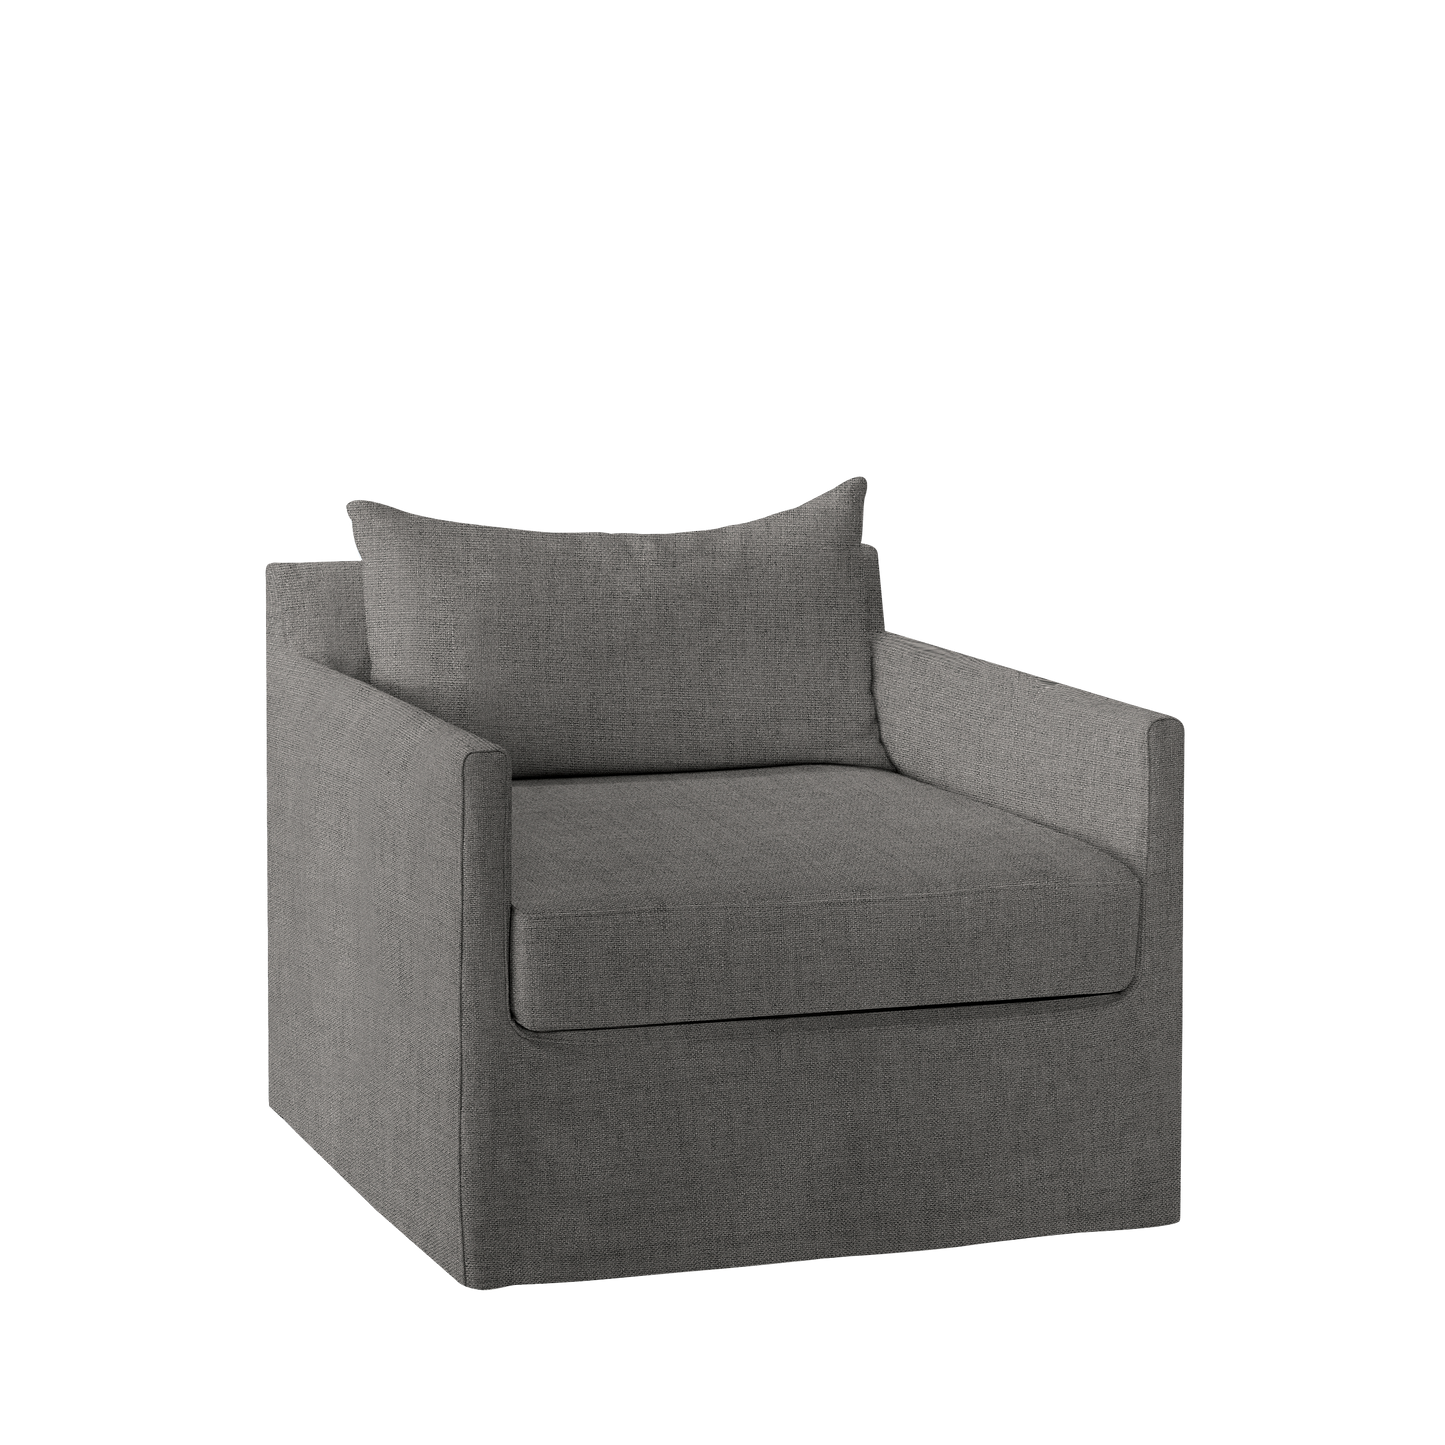 Extra wide Alba lounge chair with dark grey textile